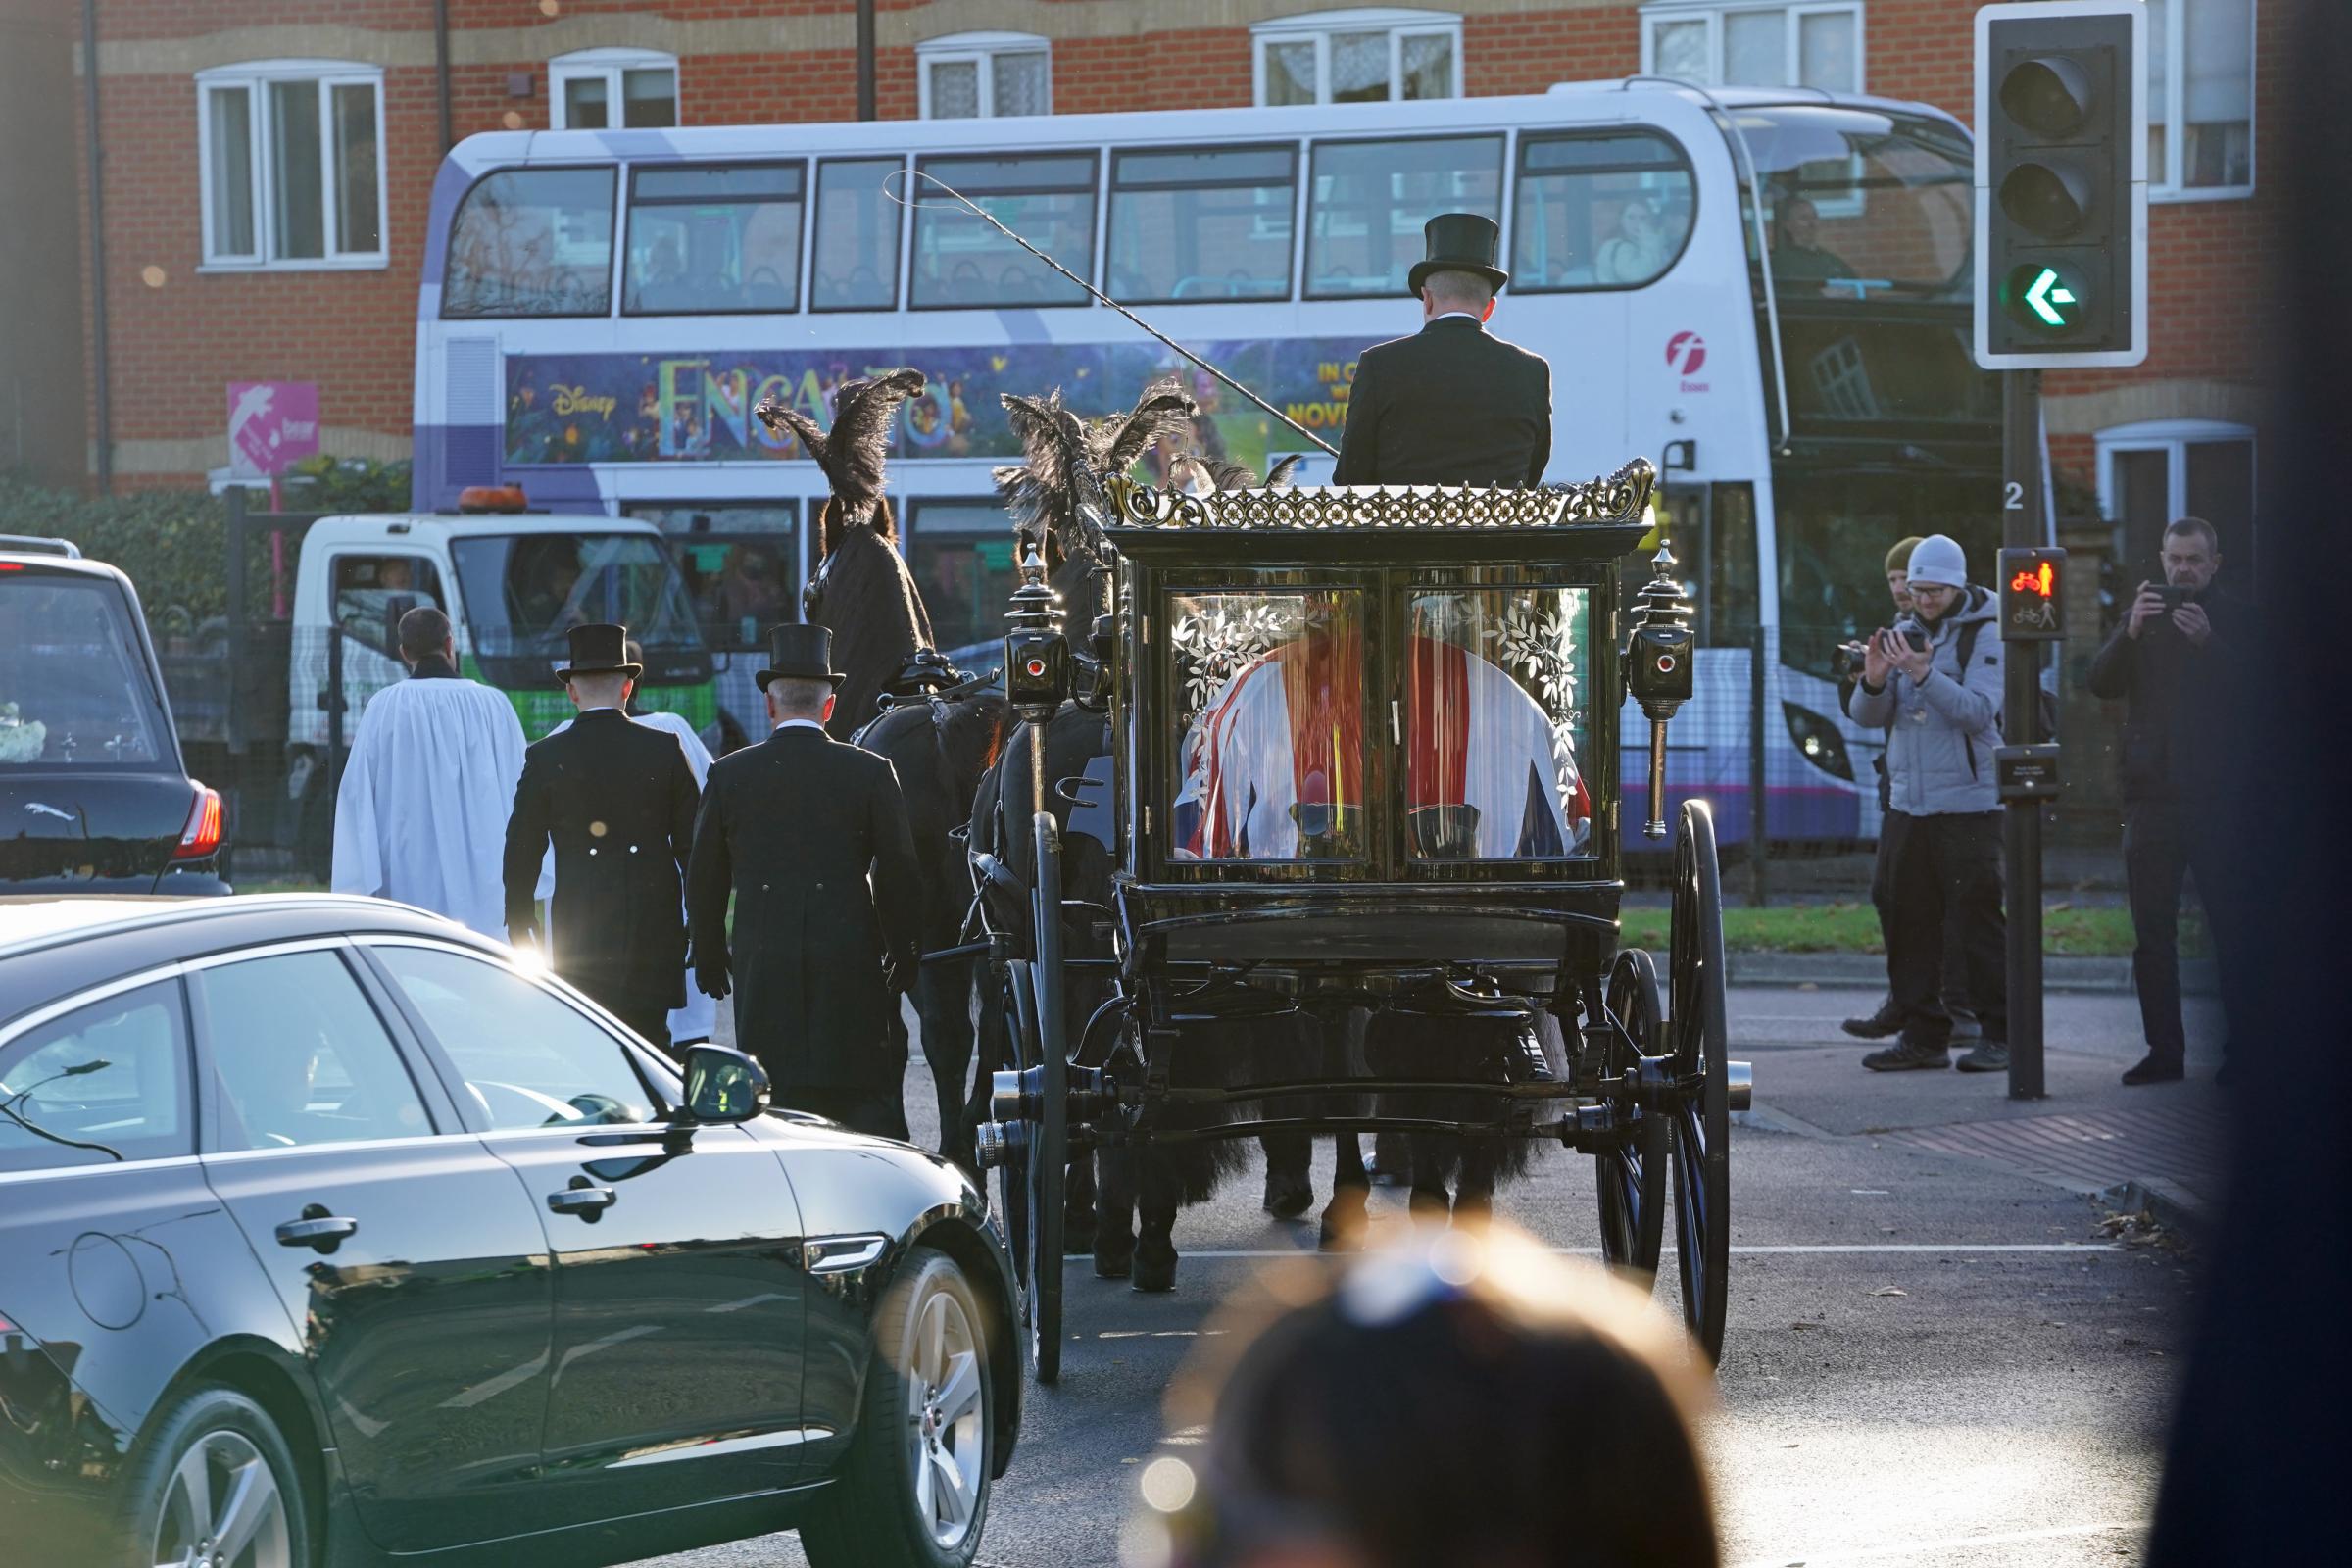 The horse drawn funeral hearse carrying the coffin of Sir David Amess leaves St Marys Church in Prittlewell, Southend following his funeral service. Picture date: Monday November 22, 2021.